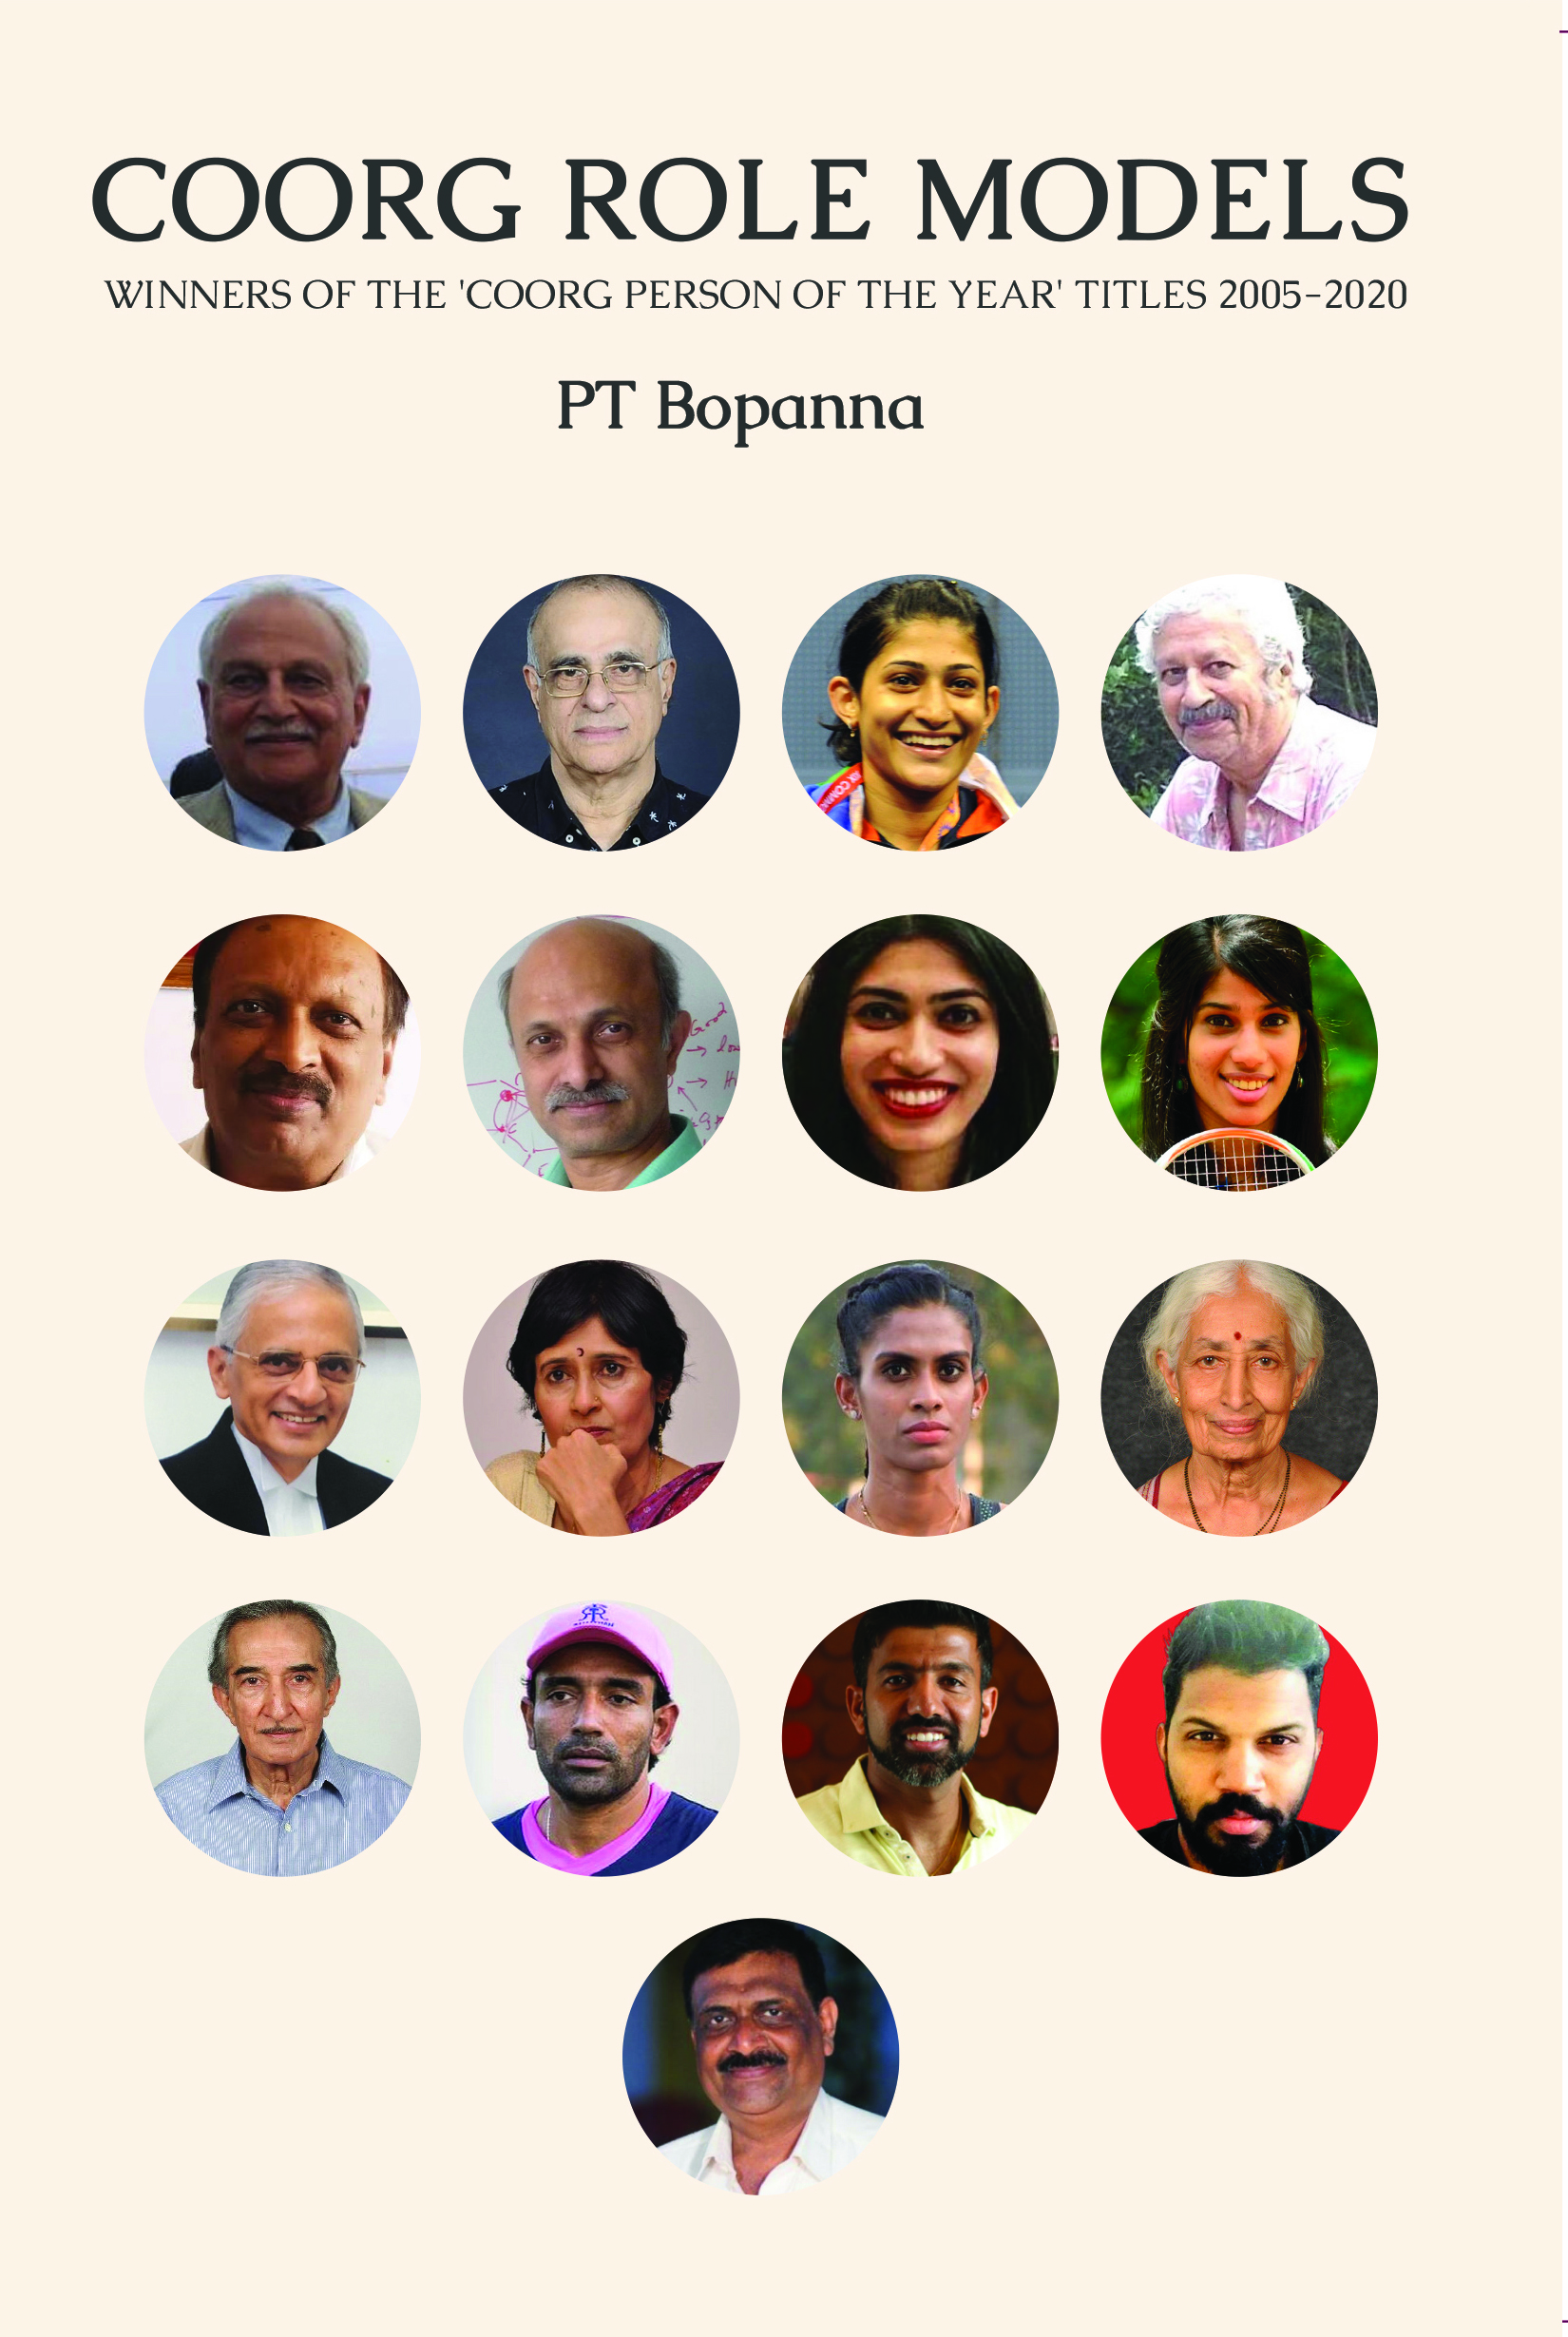 AUTHOR P.T. BOPANNA’S NEW BOOK ‘COORG ROLE MODELS’ LAUNCHED